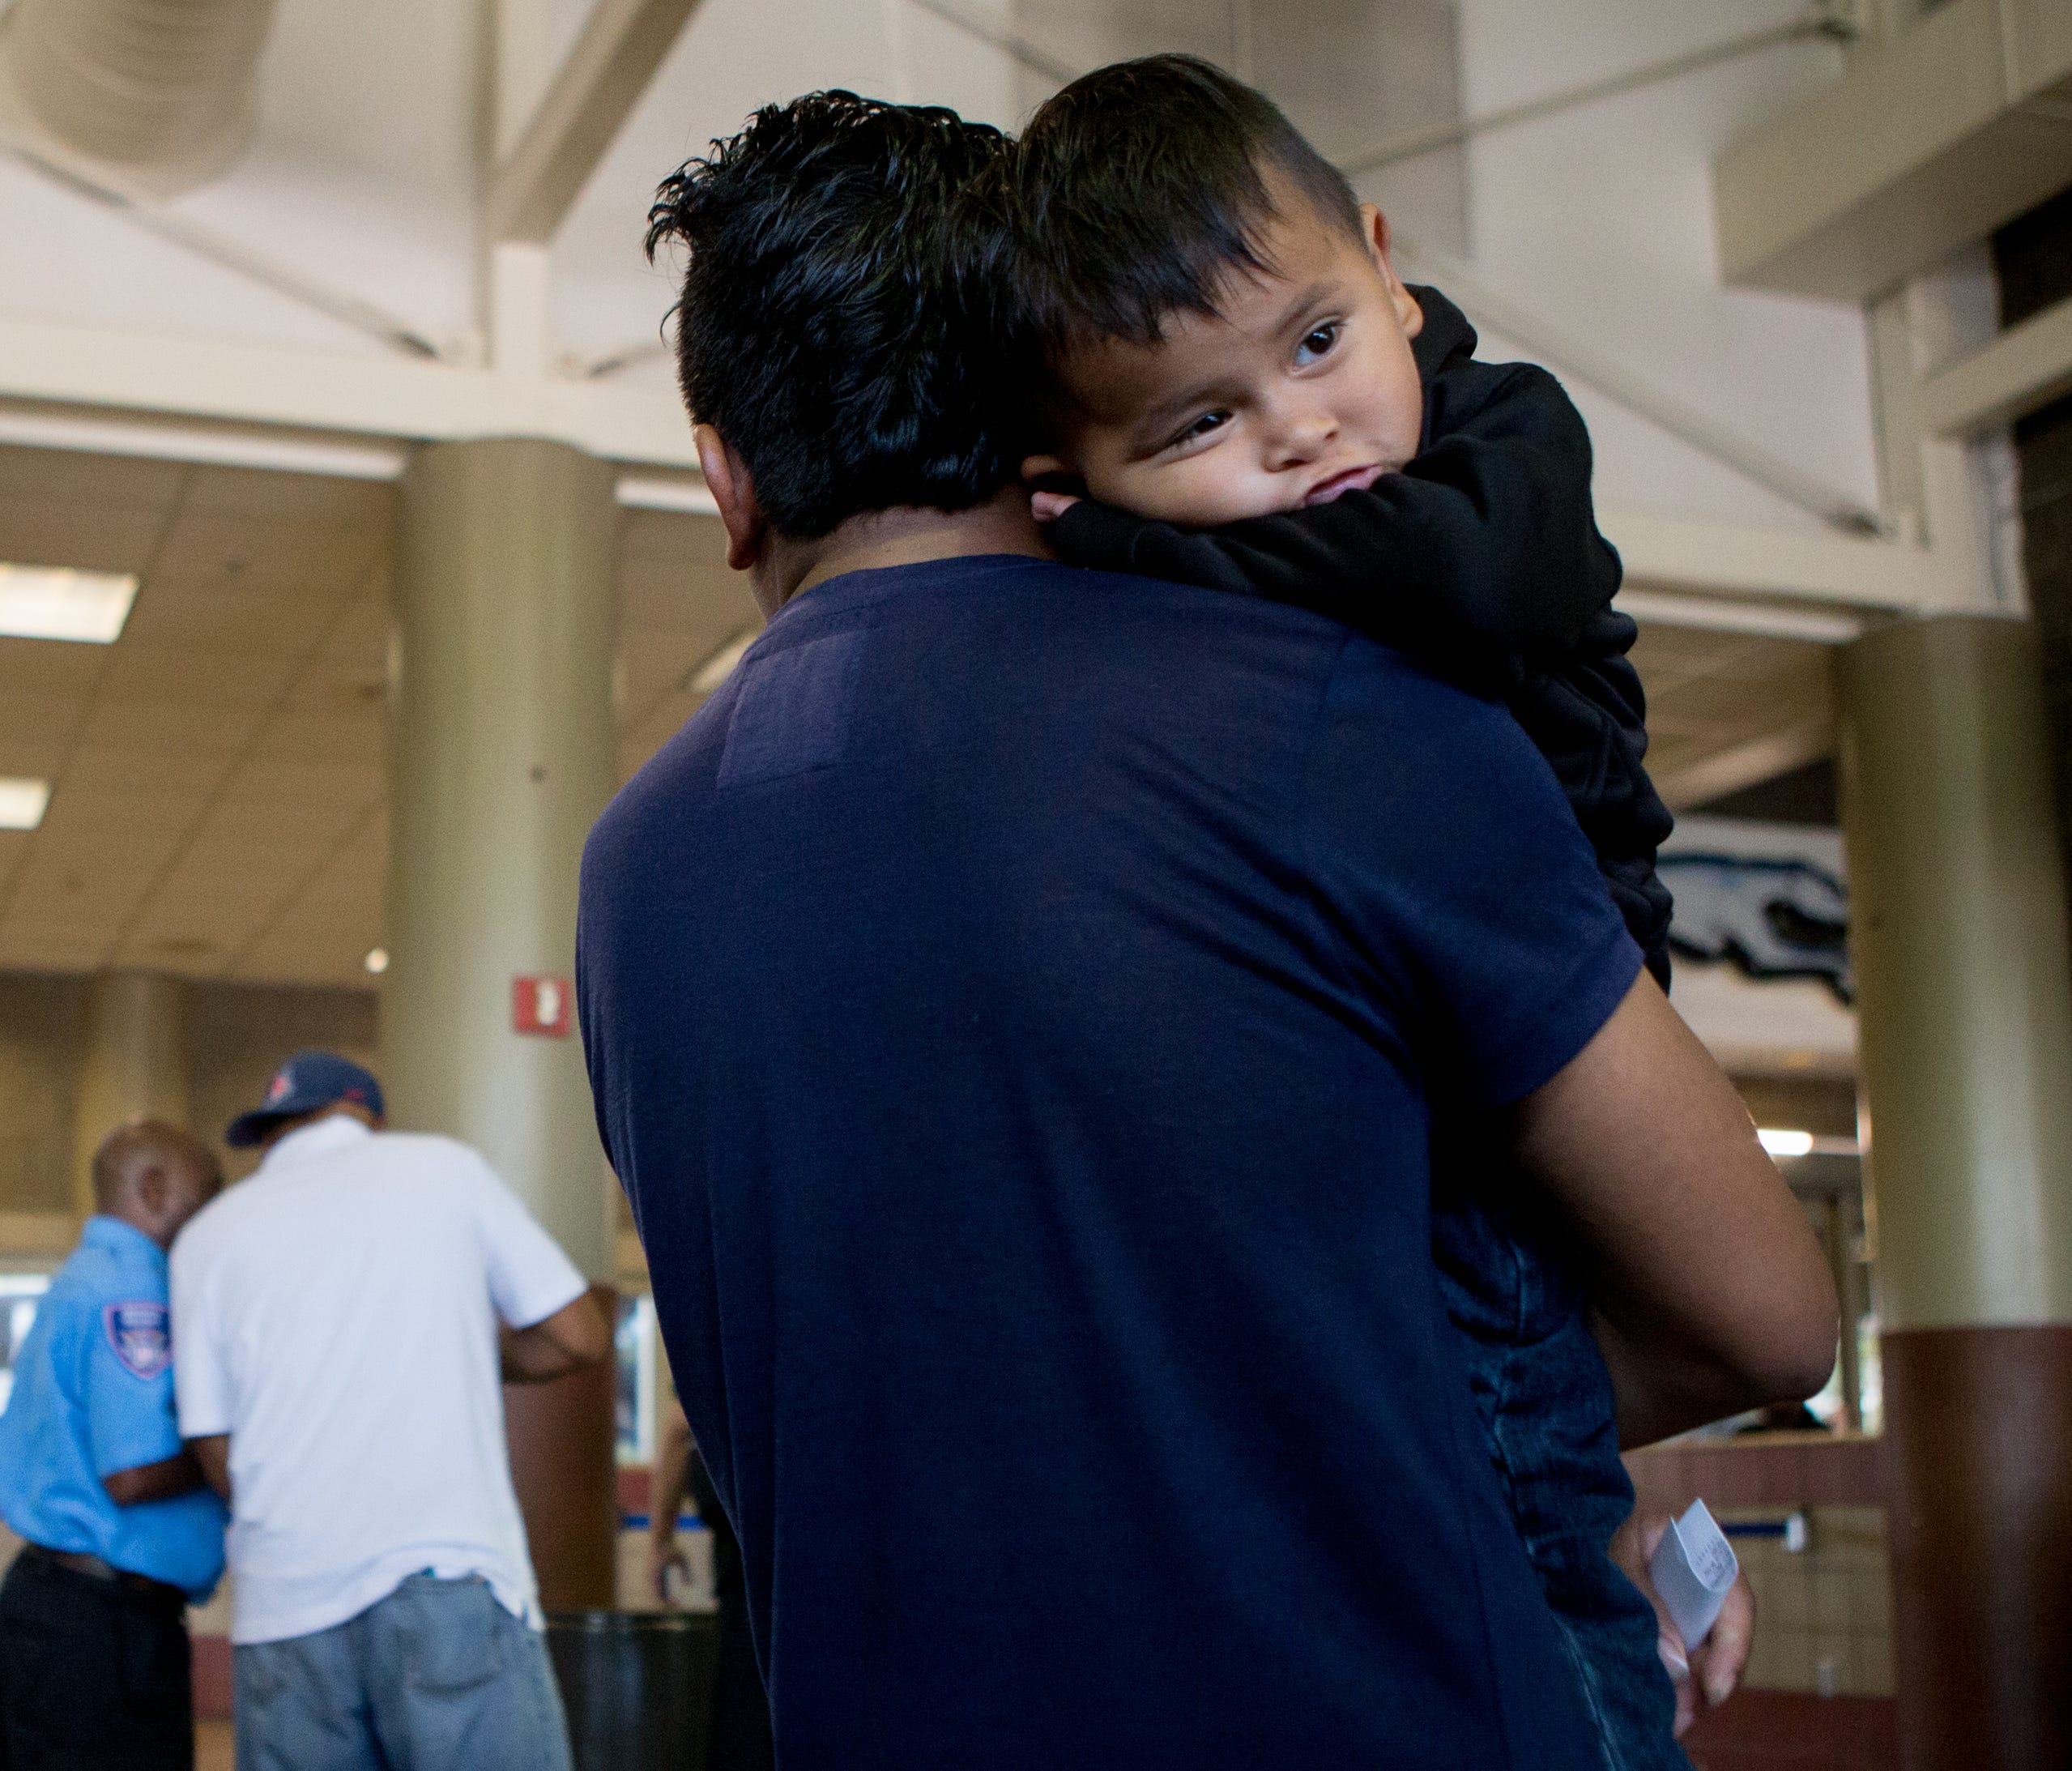 Edwin Antonio Gonzalez, 24, and his son Francisco, 2, both of Guatemala, wait to board their next bus after being released by the Department of Homeland Security on July 12, 2018, at a bus station in Phoenix.